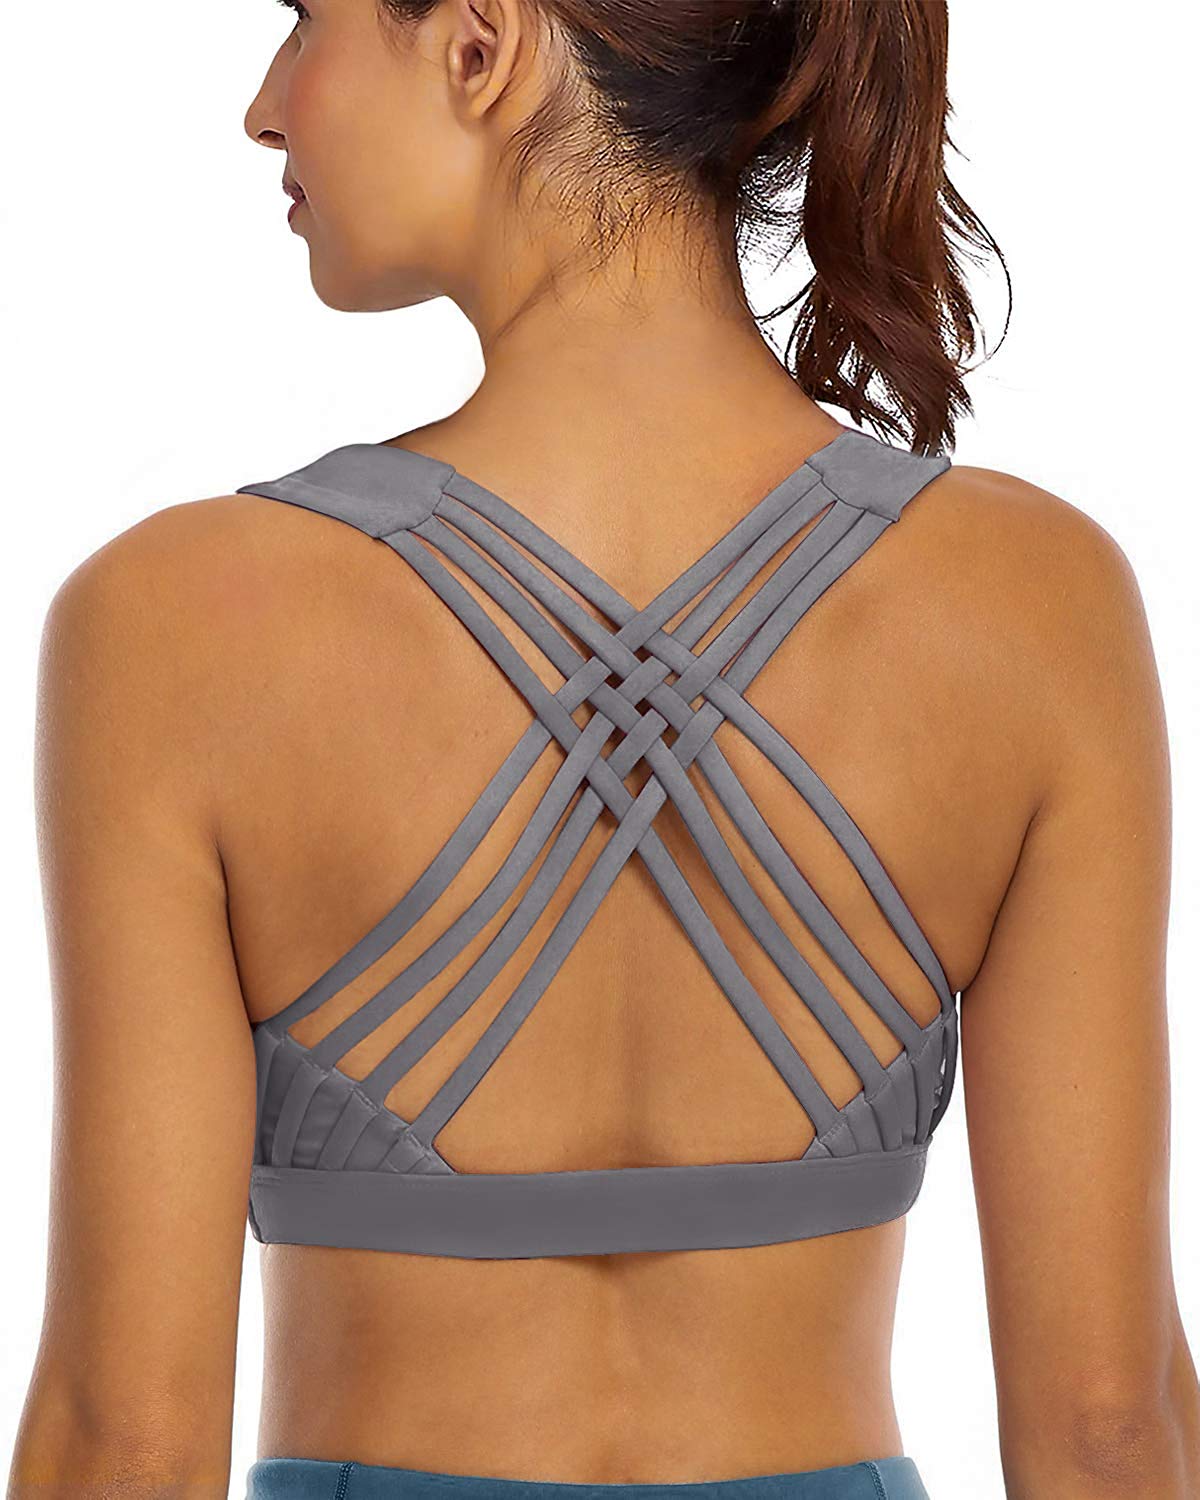 YIANNA Sports Bras for Women - Strappy Sports Bra Padded for